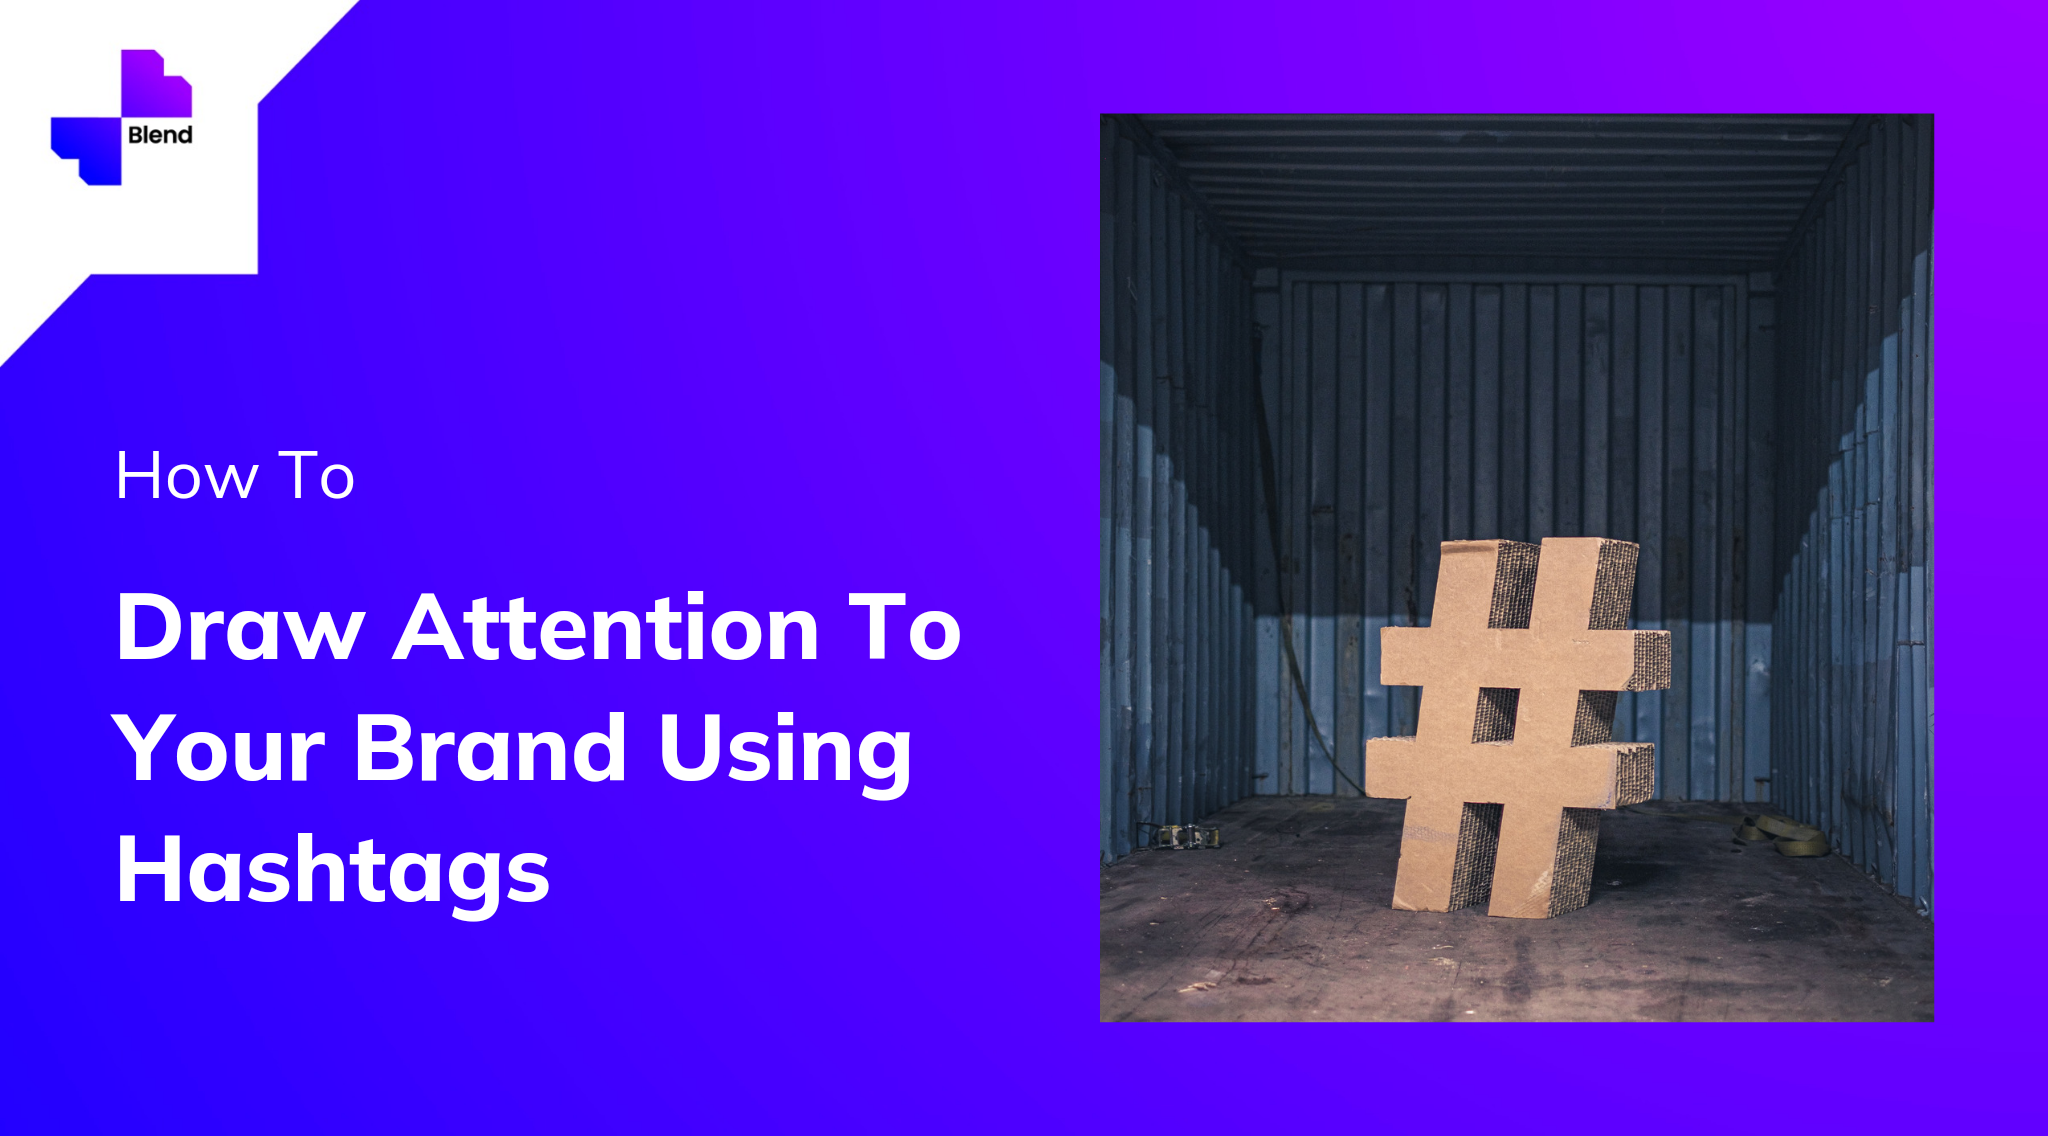 How To Draw Attention To Your Brand Using Hashtags